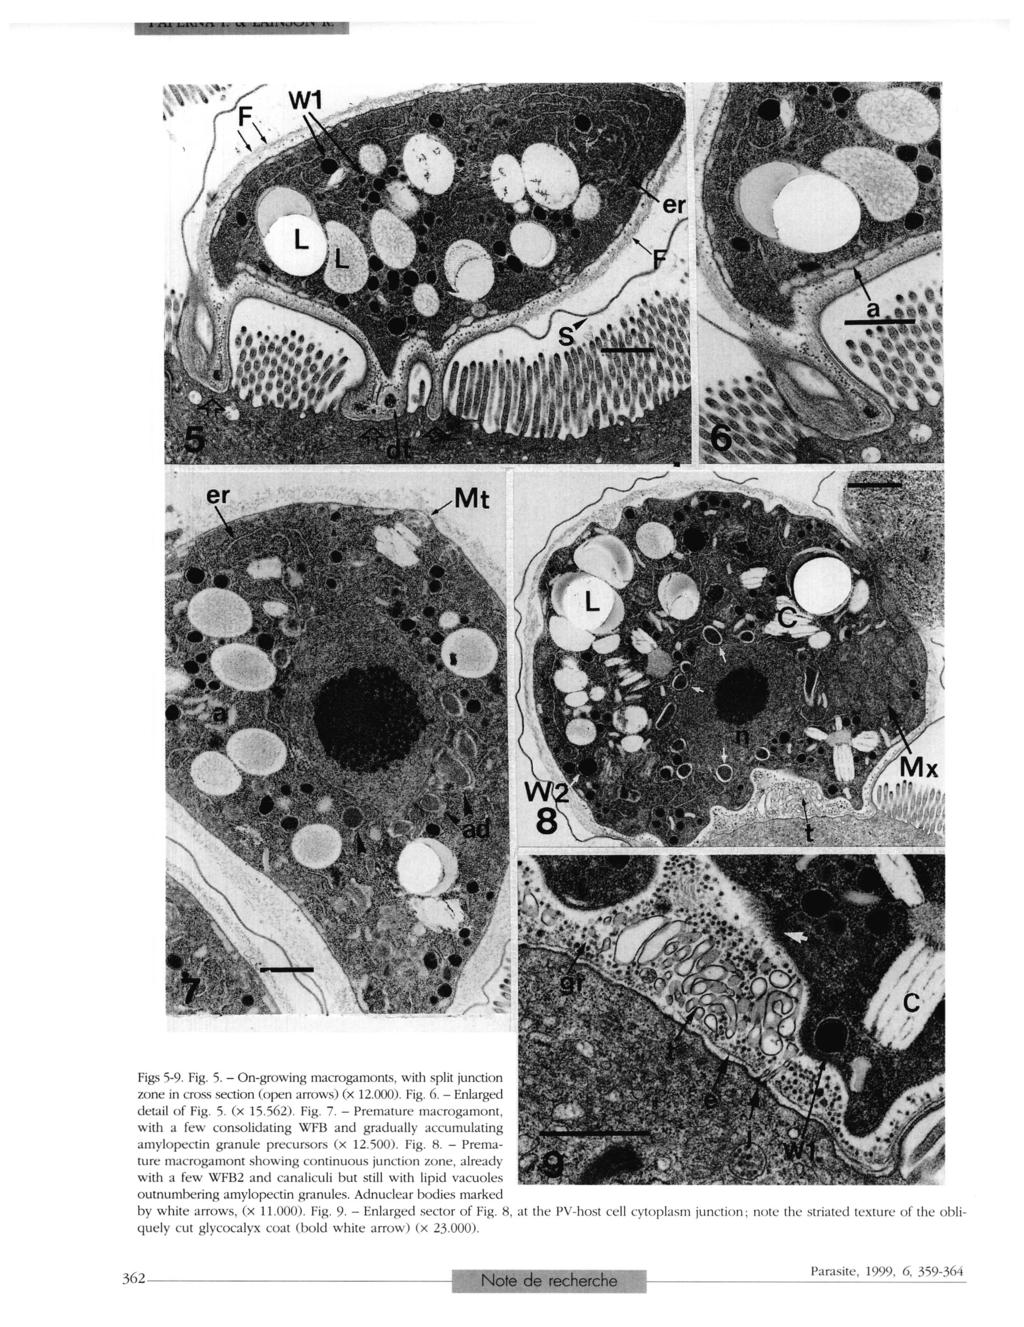 Figs 5-9. Fig. 5. - On-growing macrogamonts, with split junction zone in cross section (open arrows) (x 12.000). Fig. 6. - Enlarged detail of Fig. 5. (x 15.562). Fig. 7.